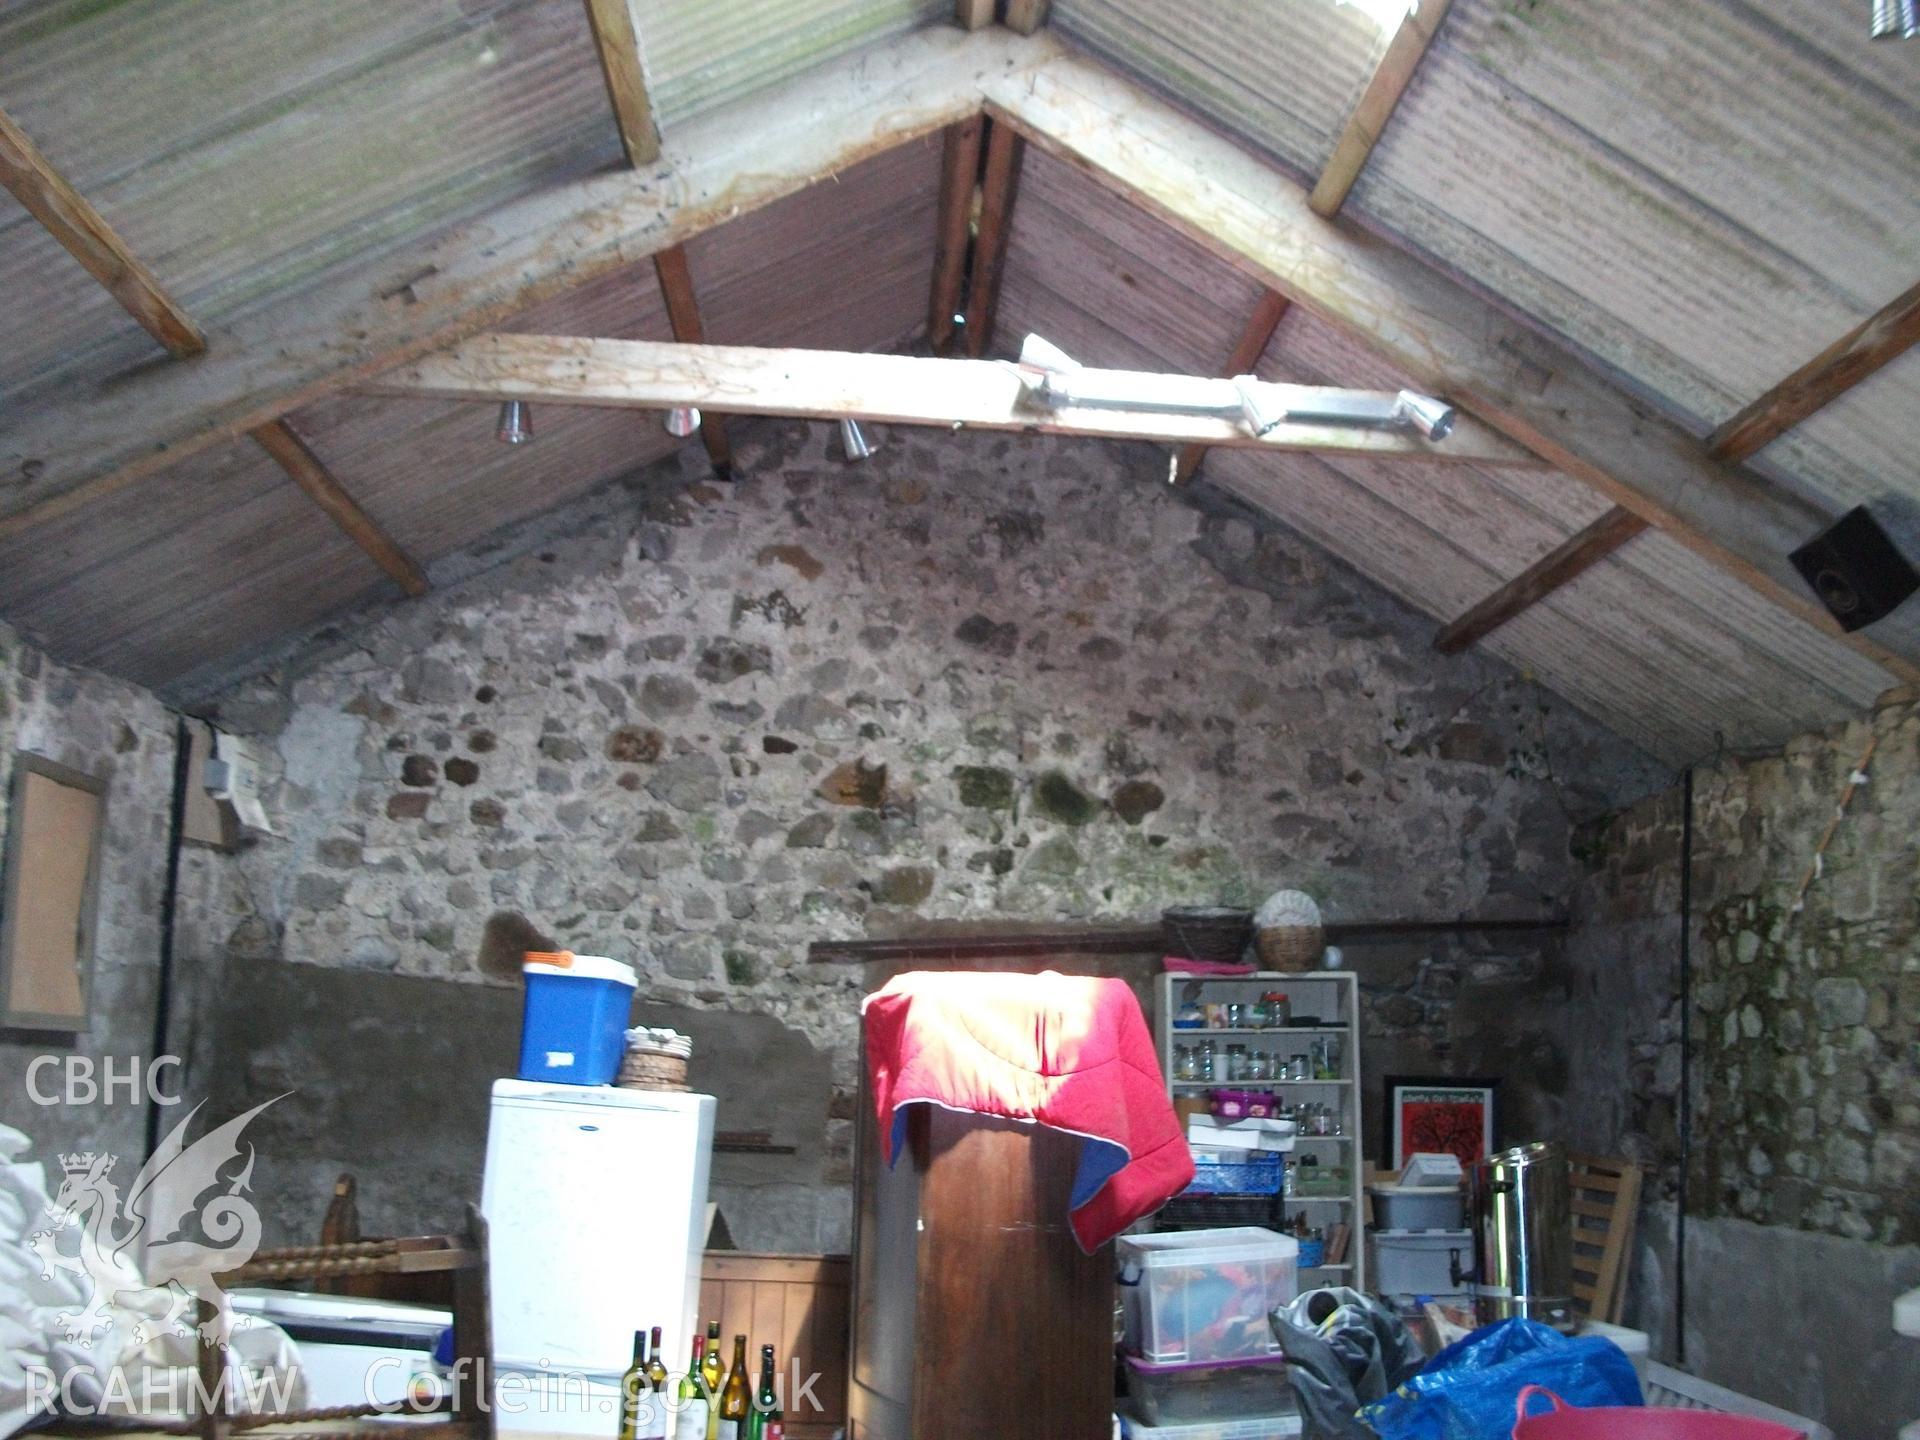 Photograph showing interior of 'ale and pail barn,' at Pant-y-Castell, Maesybont, Photographed by Mark Waghorn to meet a condition attached to planning application.